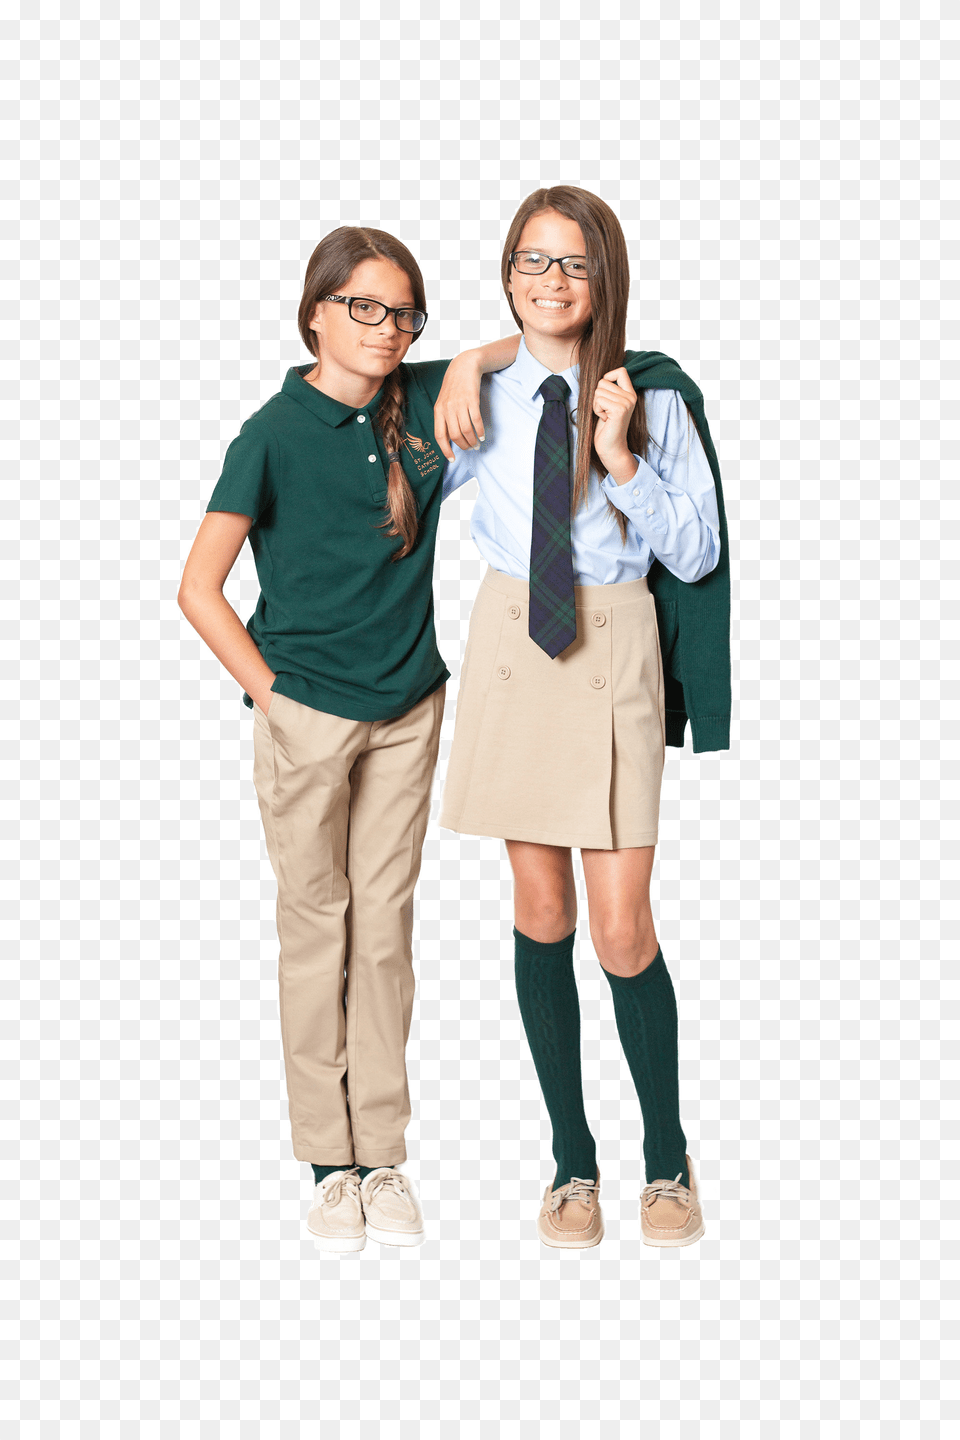 Chapel Dress Day Students In Uniform Photoshop, Accessories, Teen, Sleeve, Person Png